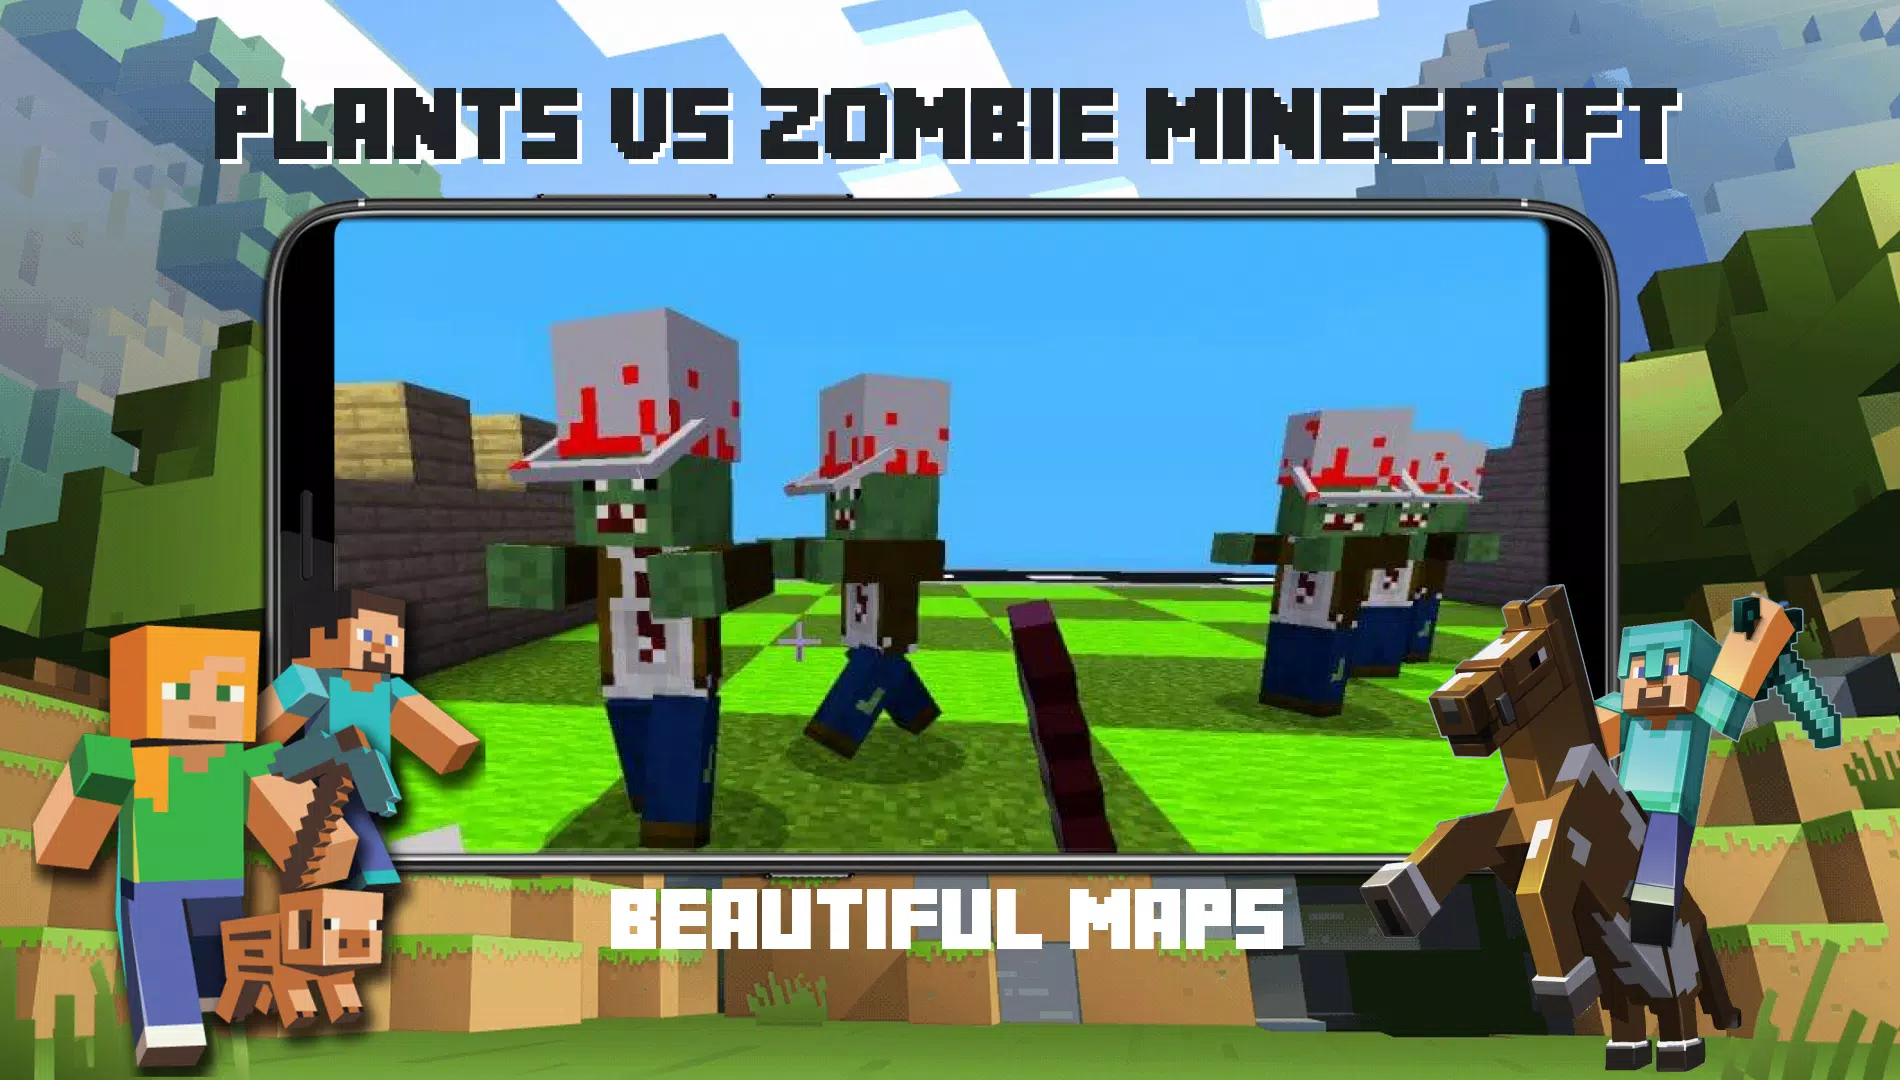 Plants Vs Zombies mod for Minecraft. APK untuk Unduhan Android